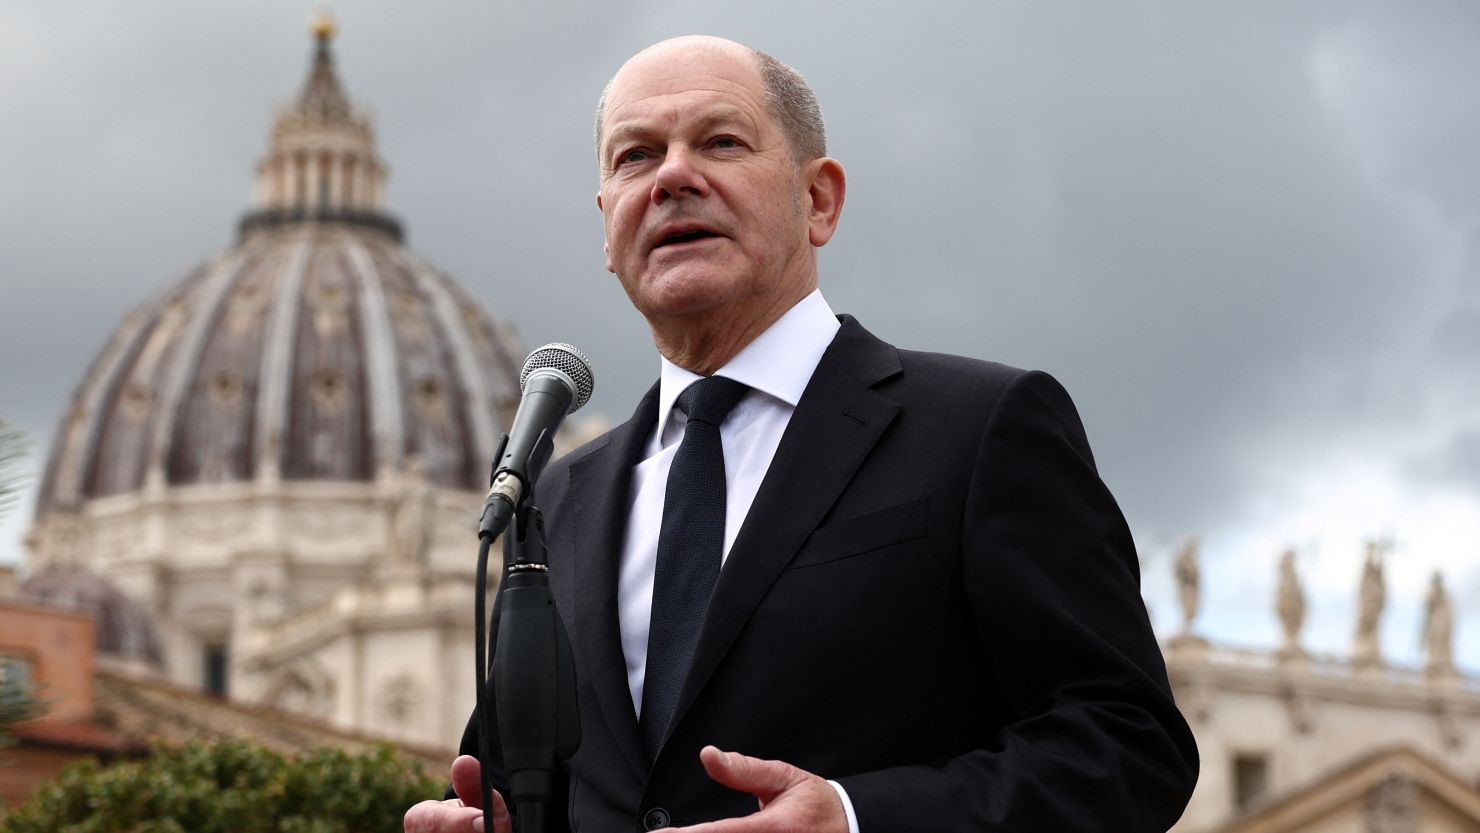 German Chancellor Olaf Scholz called the leak a “very serious matter.”